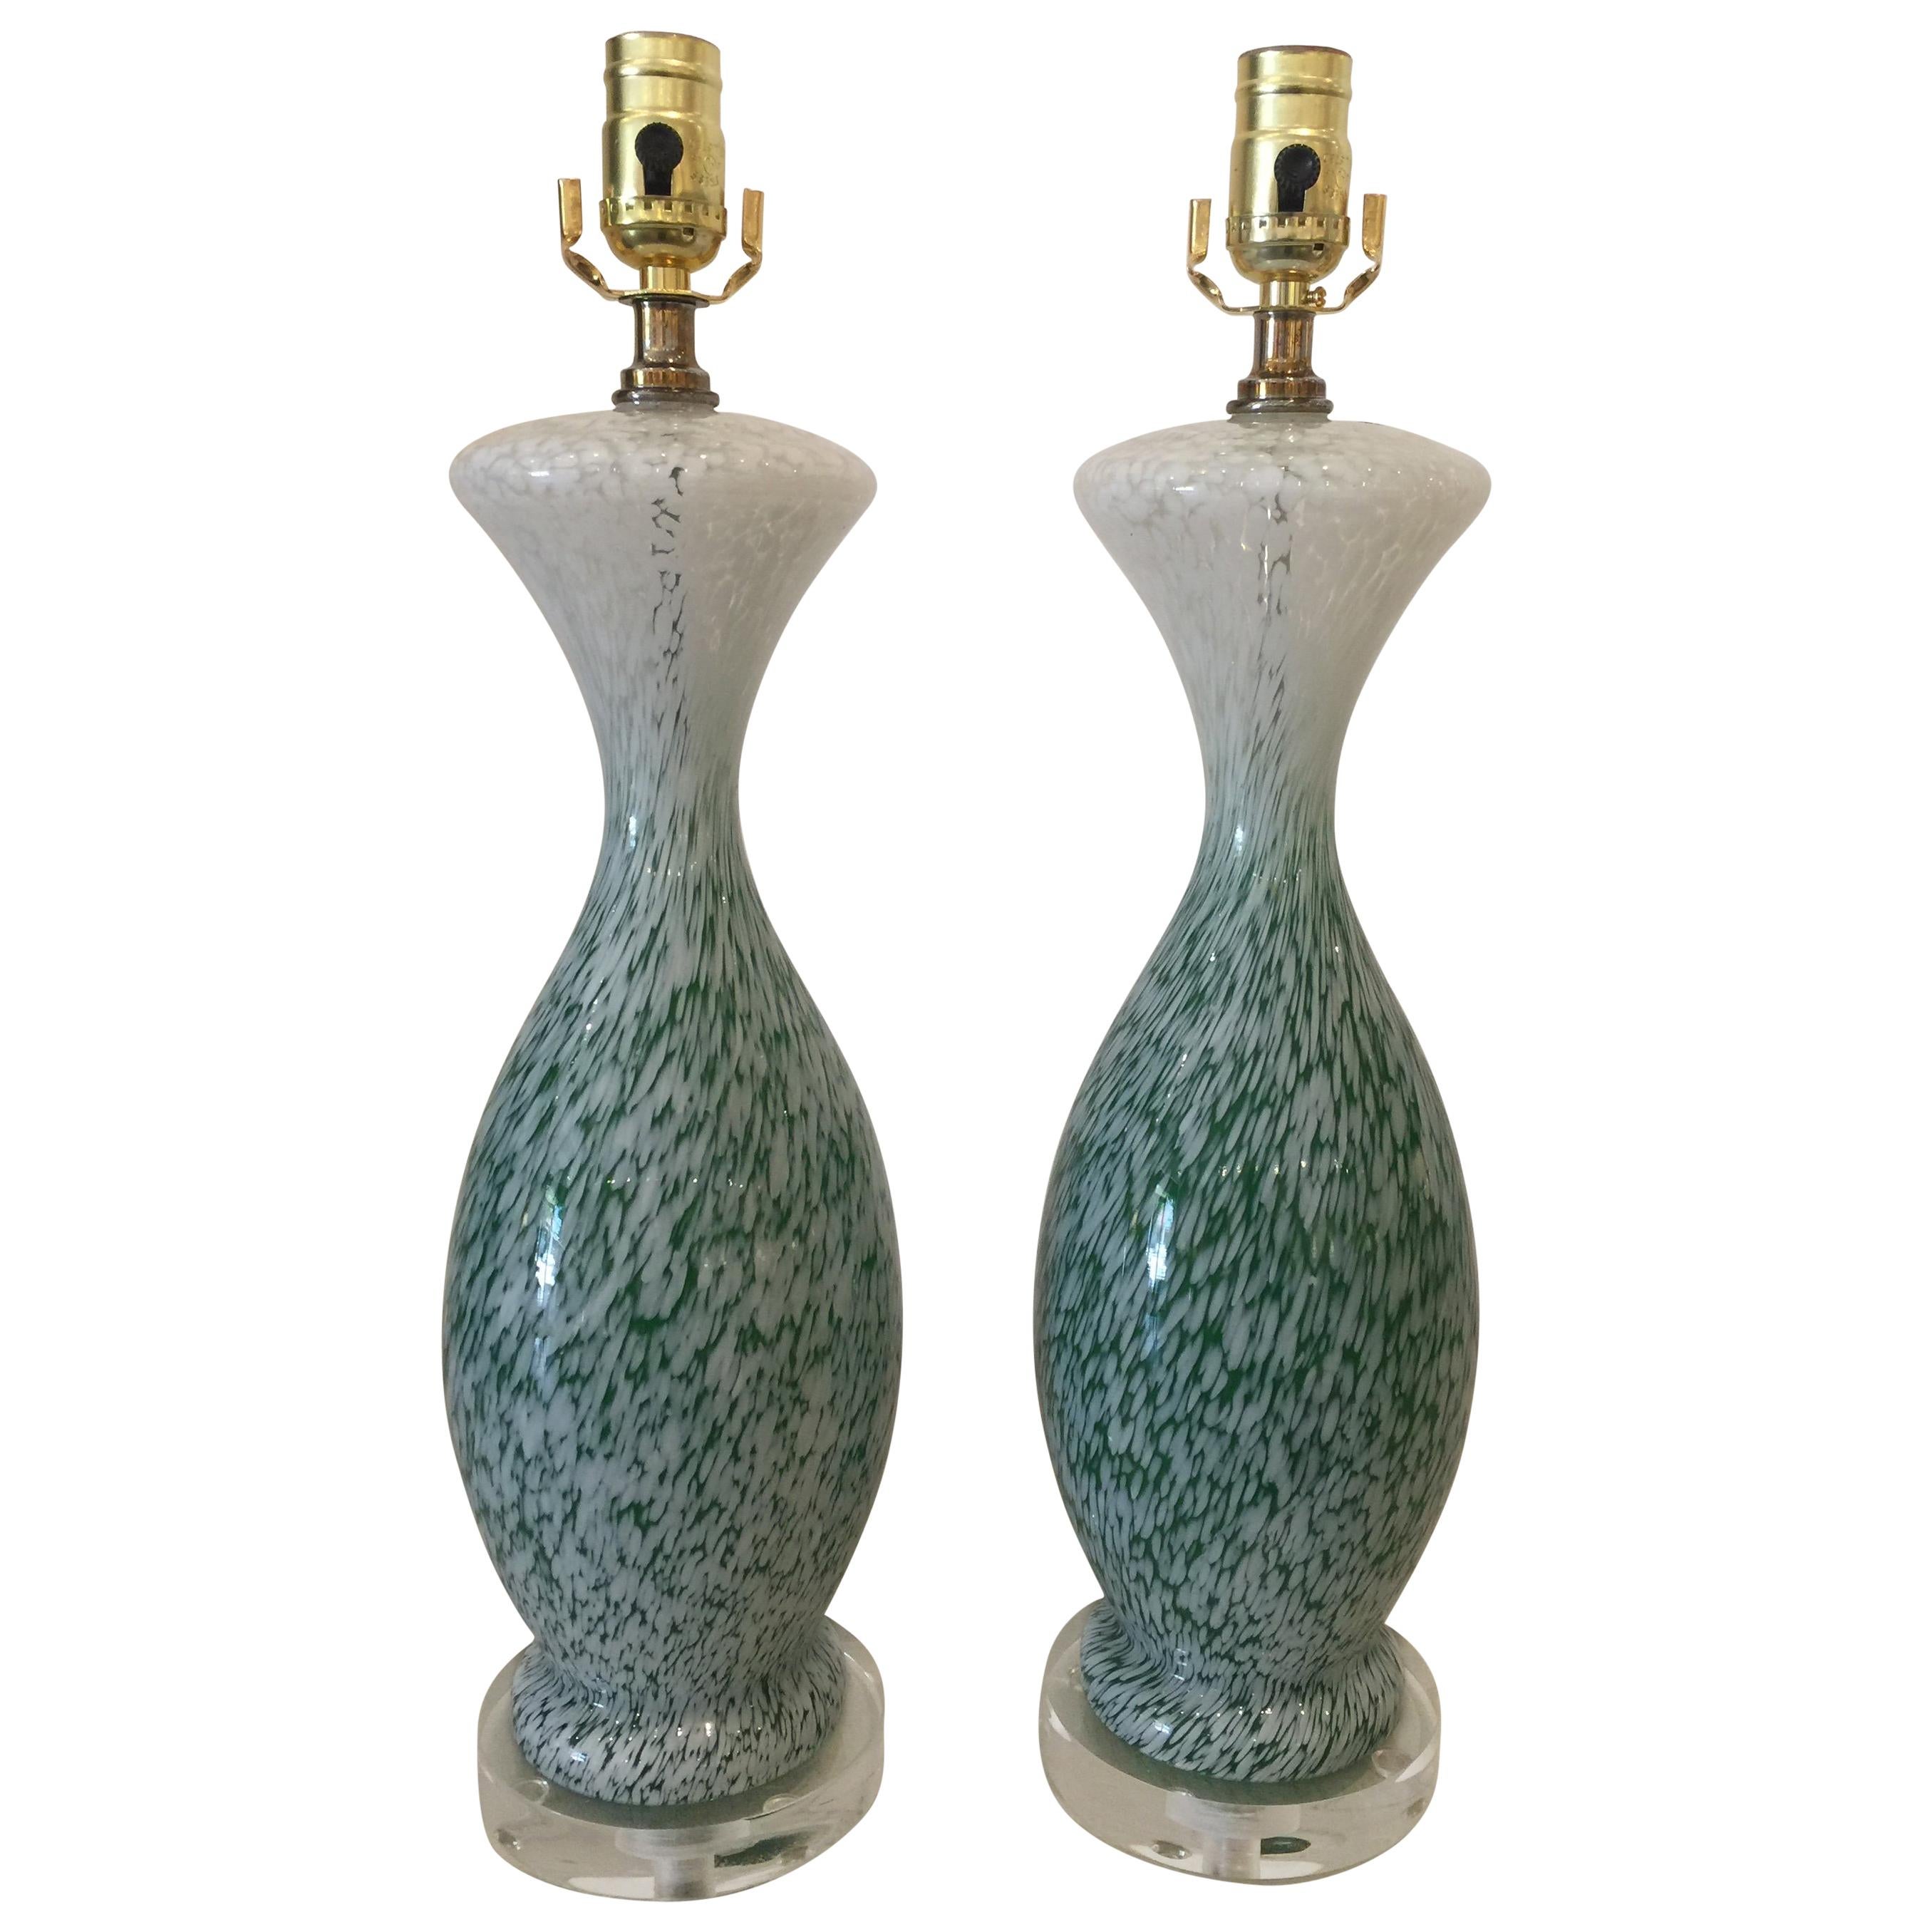 Pair of Vintage French Green and White Glass Table Lamps on Lucite Bases, 1960s